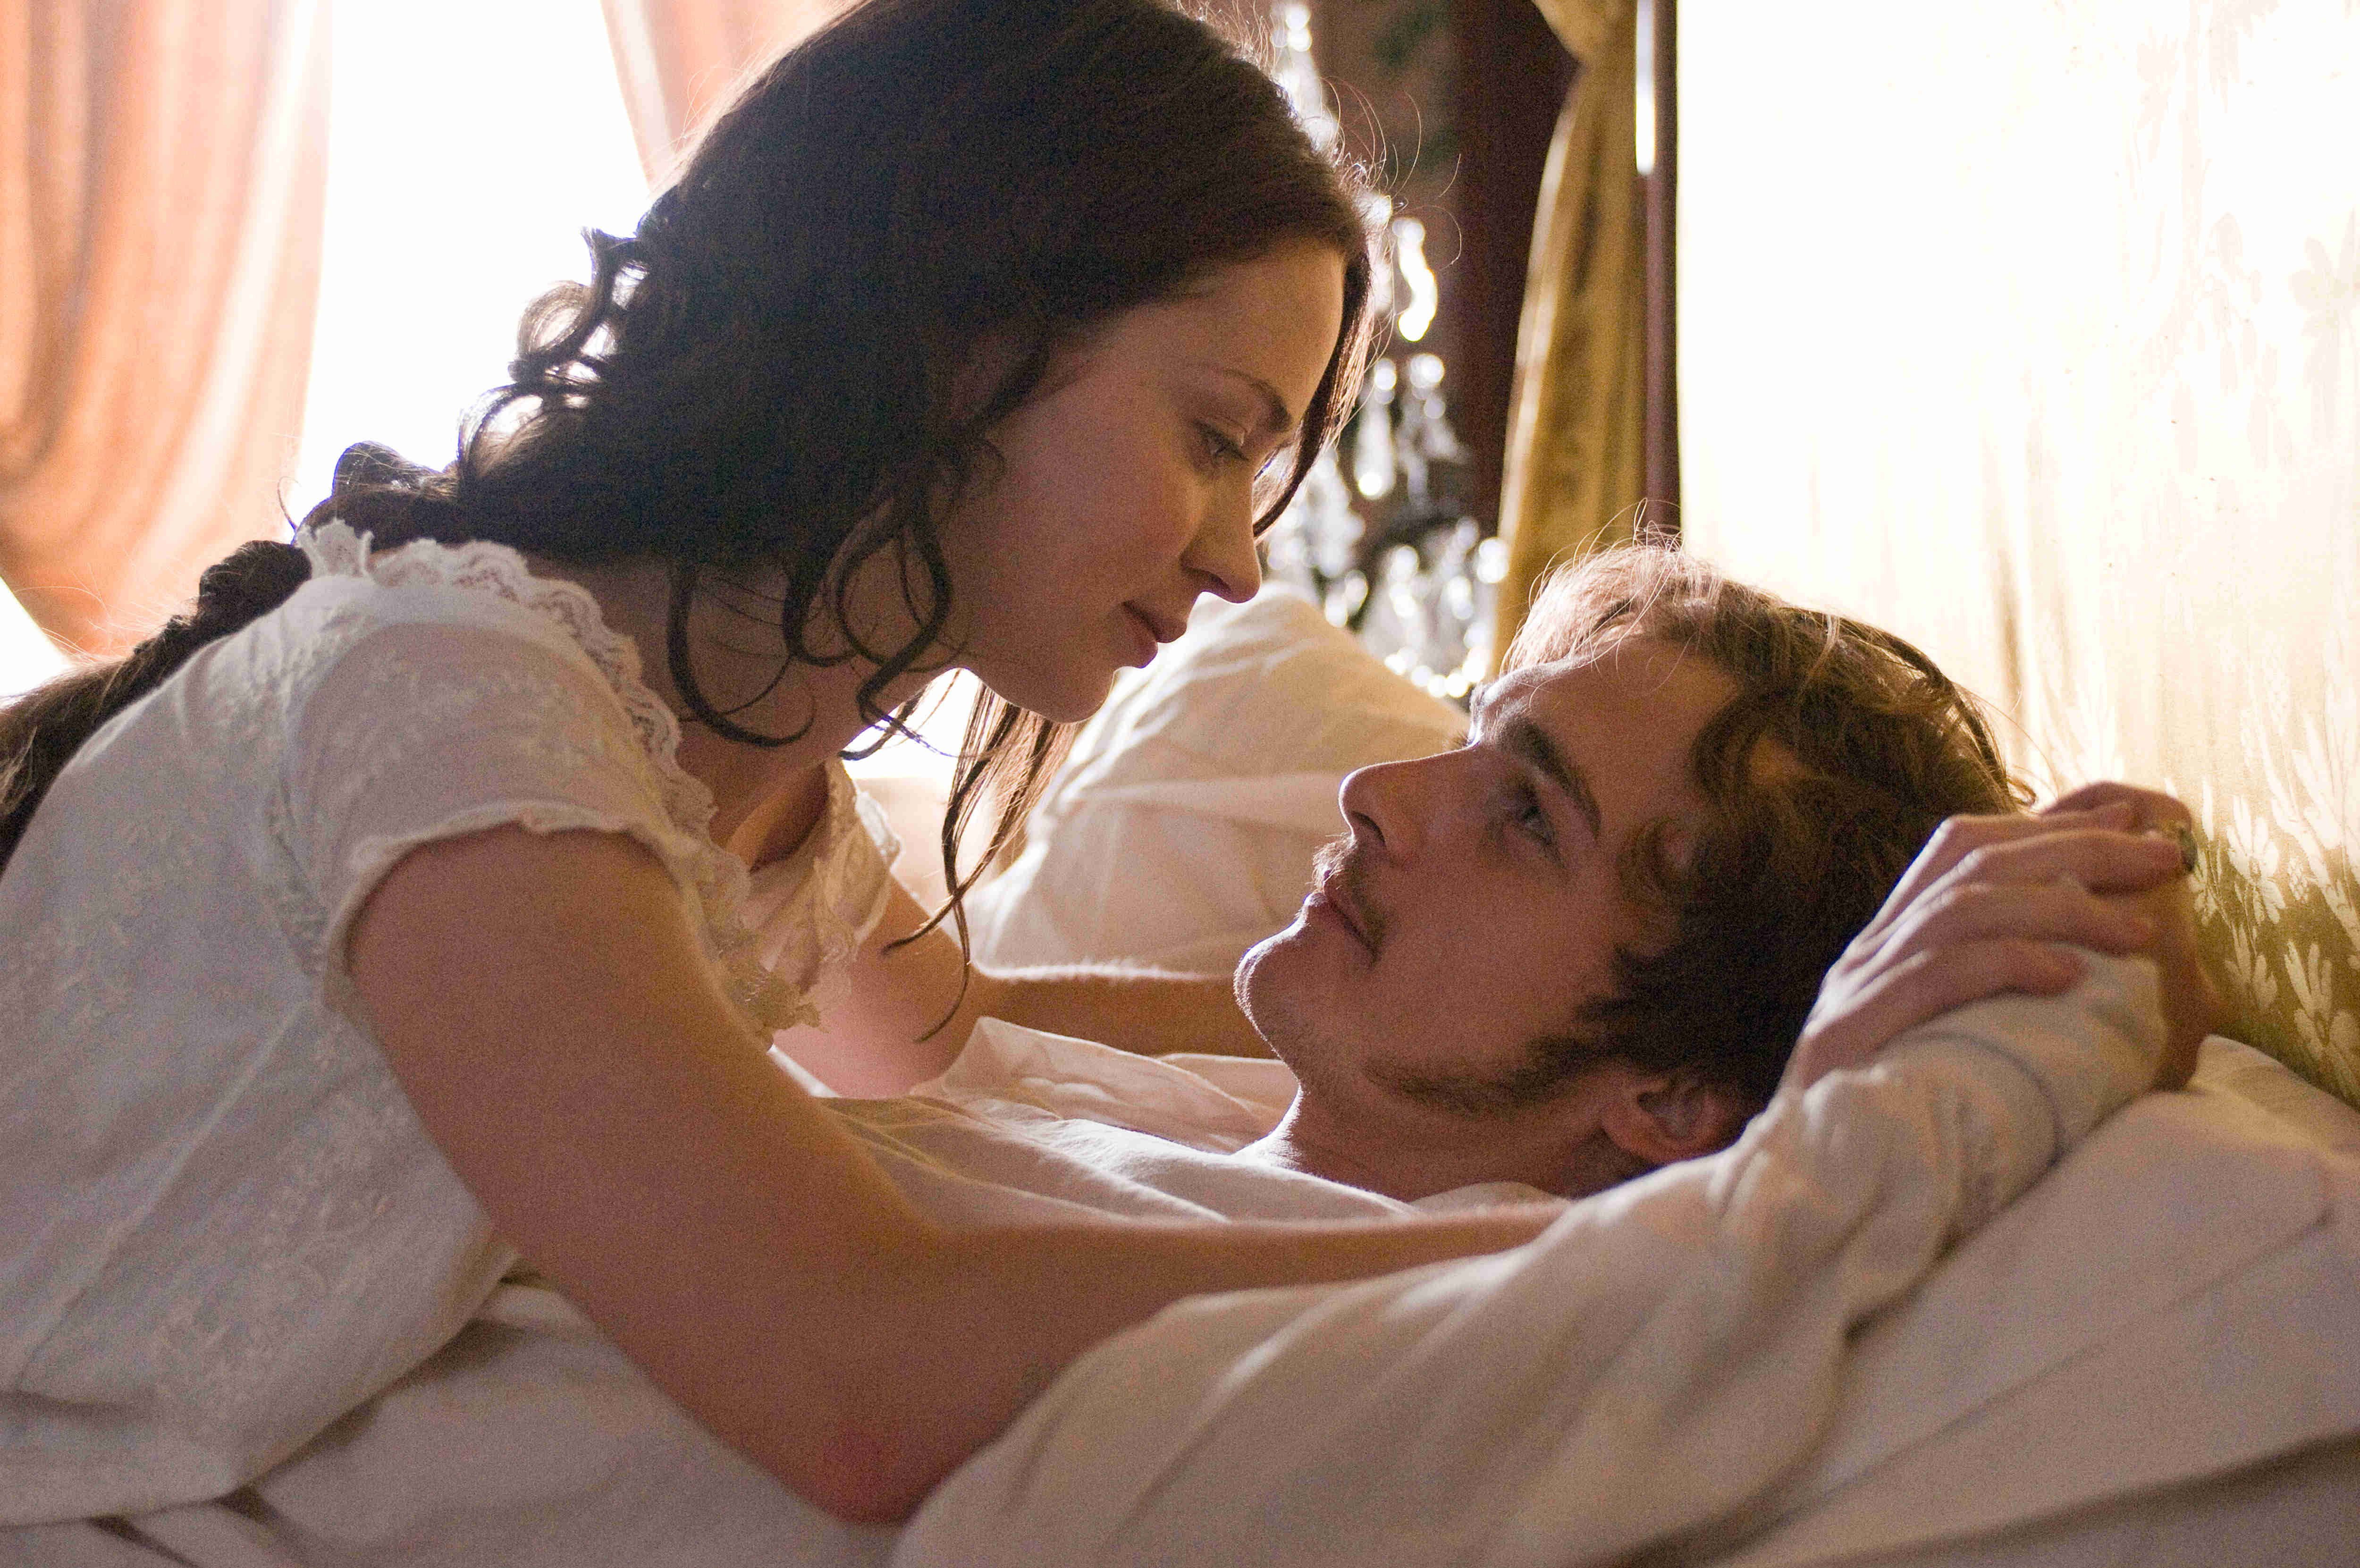 Emily Blunt stars as Young Victoria and Rupert Friend stars as Prince Albert in Apparition's The Young Victoria (2009)